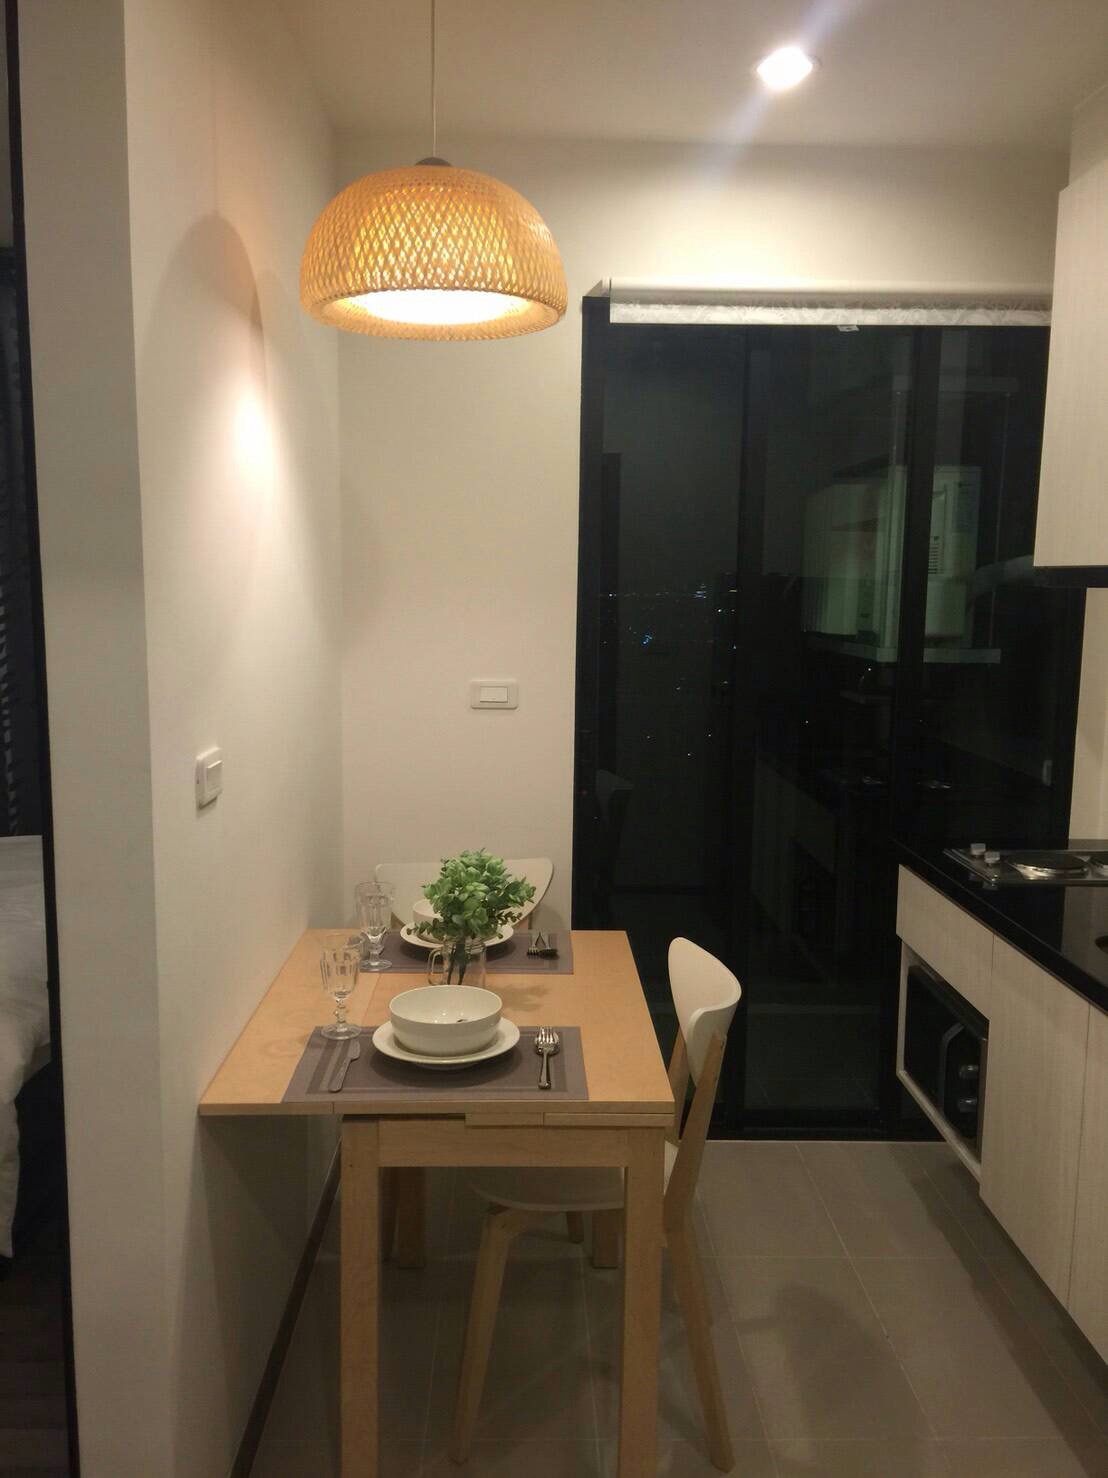 RE/MAX All Star Realty Agency's New One-Bed Condos fully furnished for rent 11,000 – 13,000 Baht at On Nut BTS – The Base, Basepark East & West (Soi 77) 1